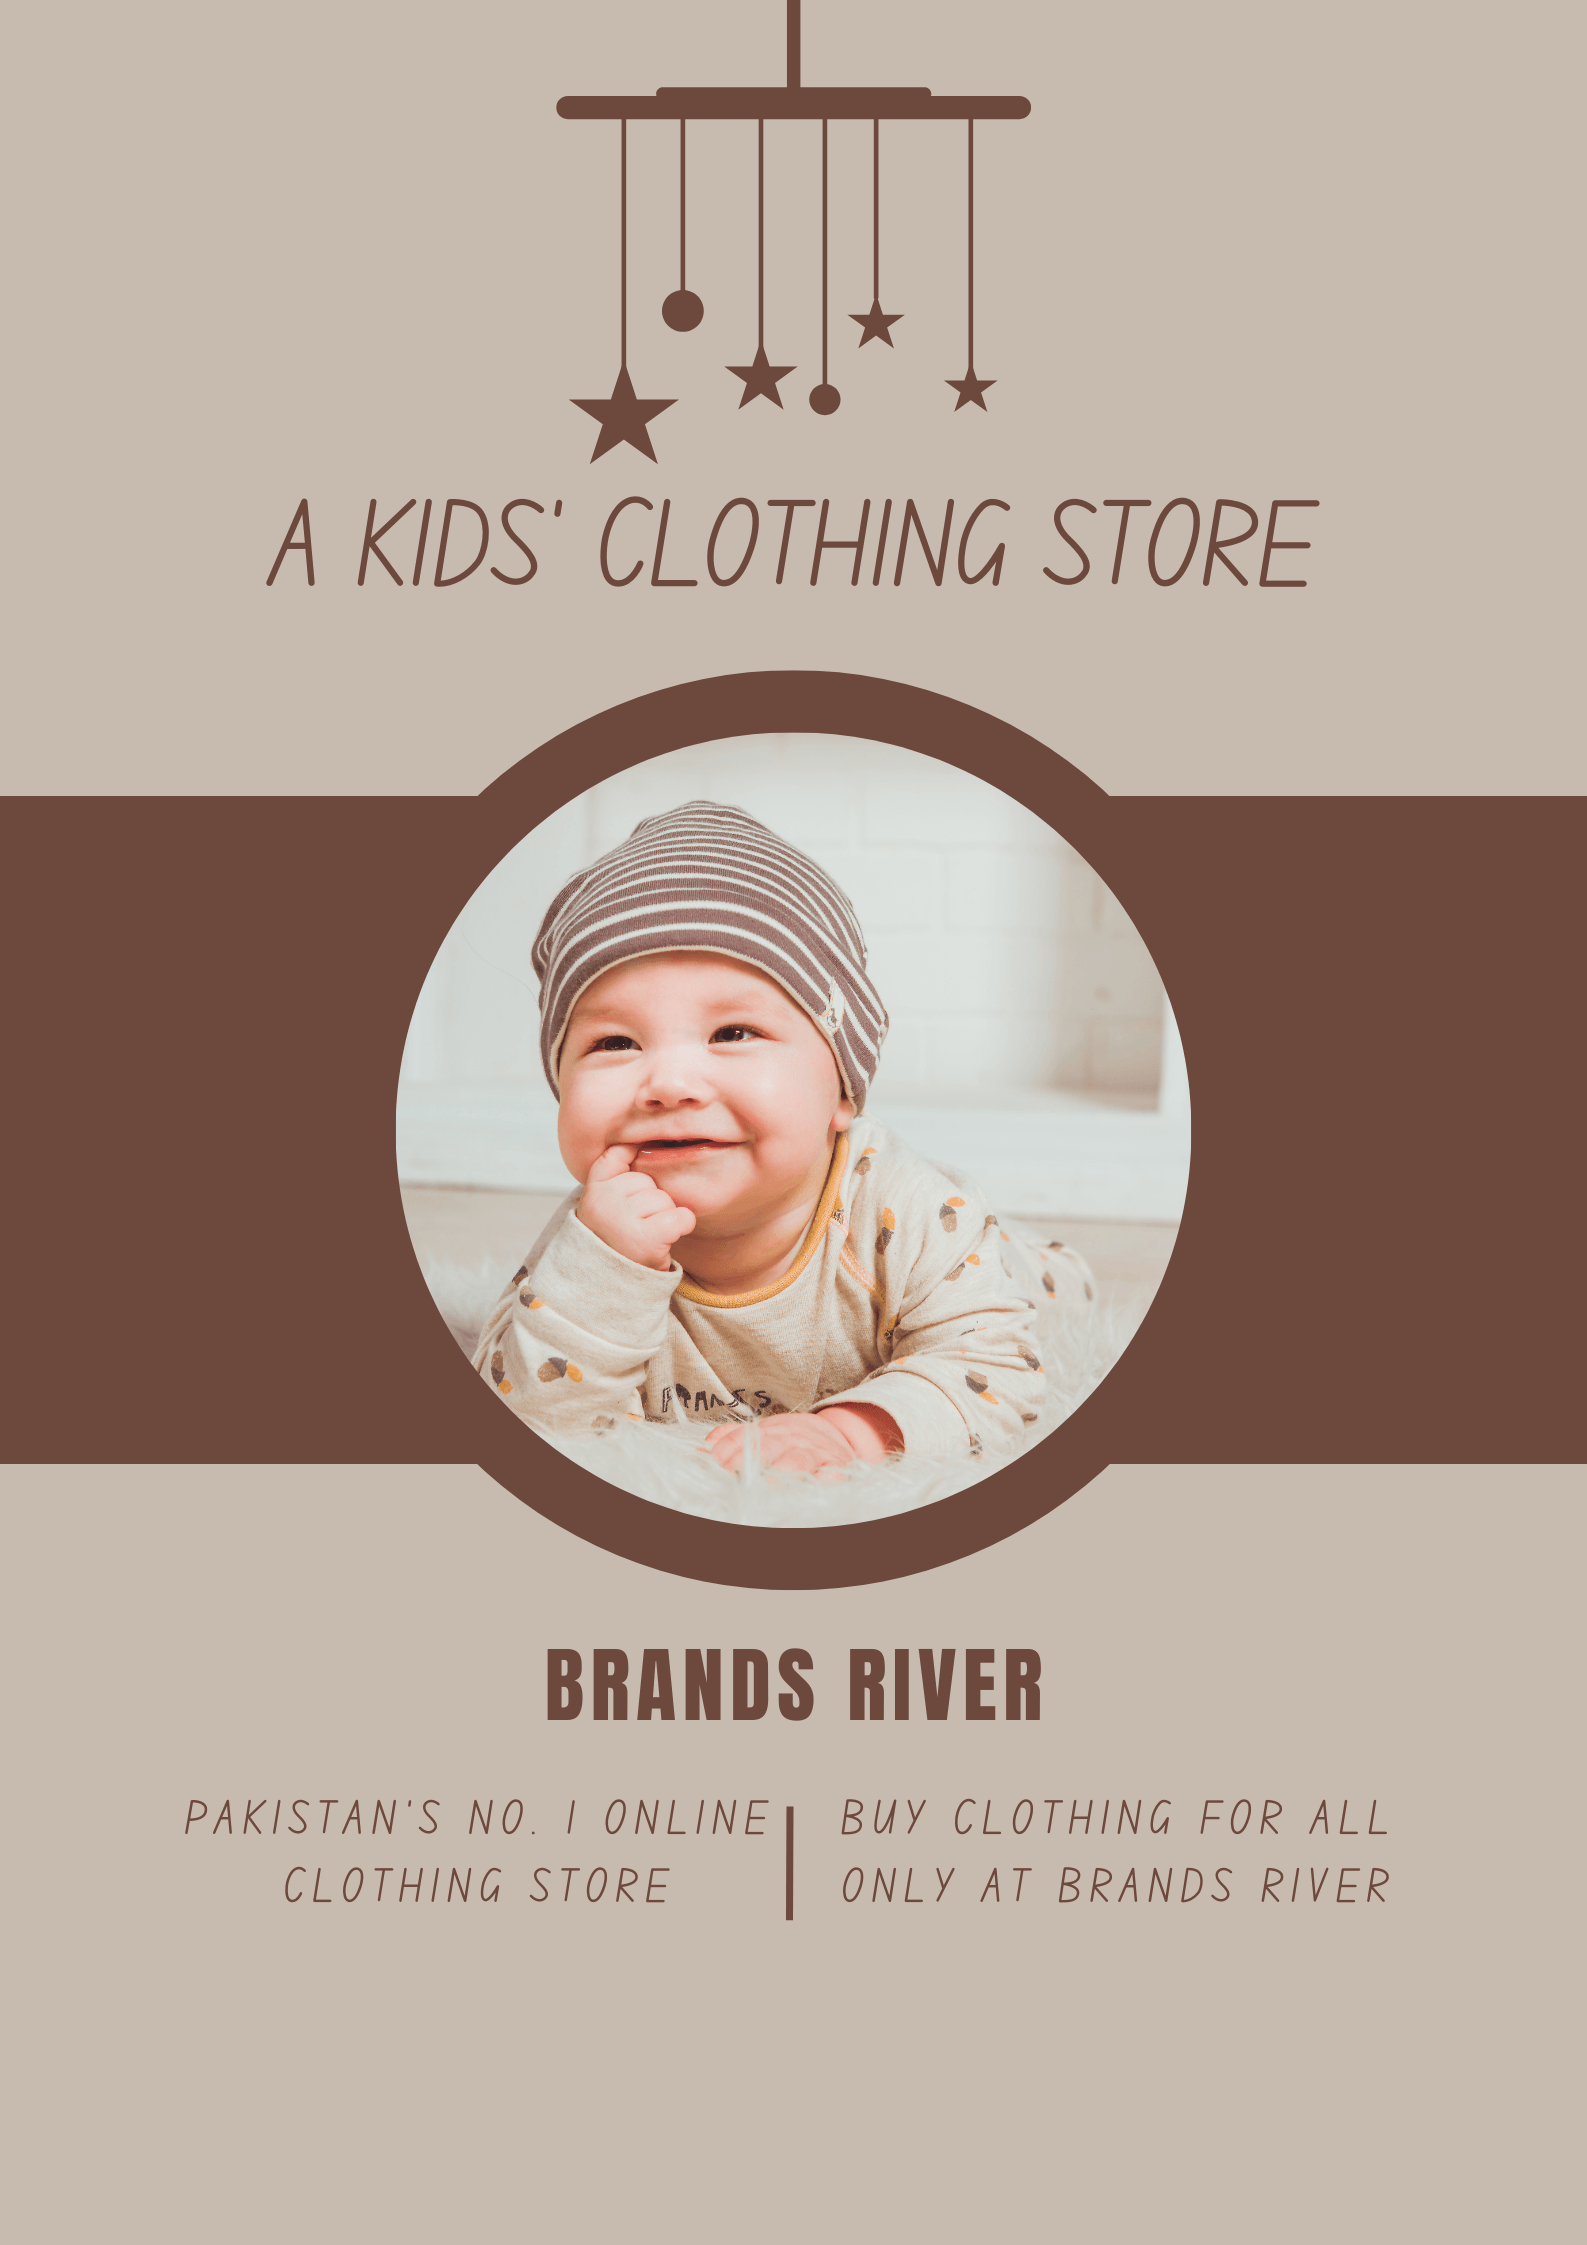 Brands River Boys Clothes: Everything You Need - Brands River